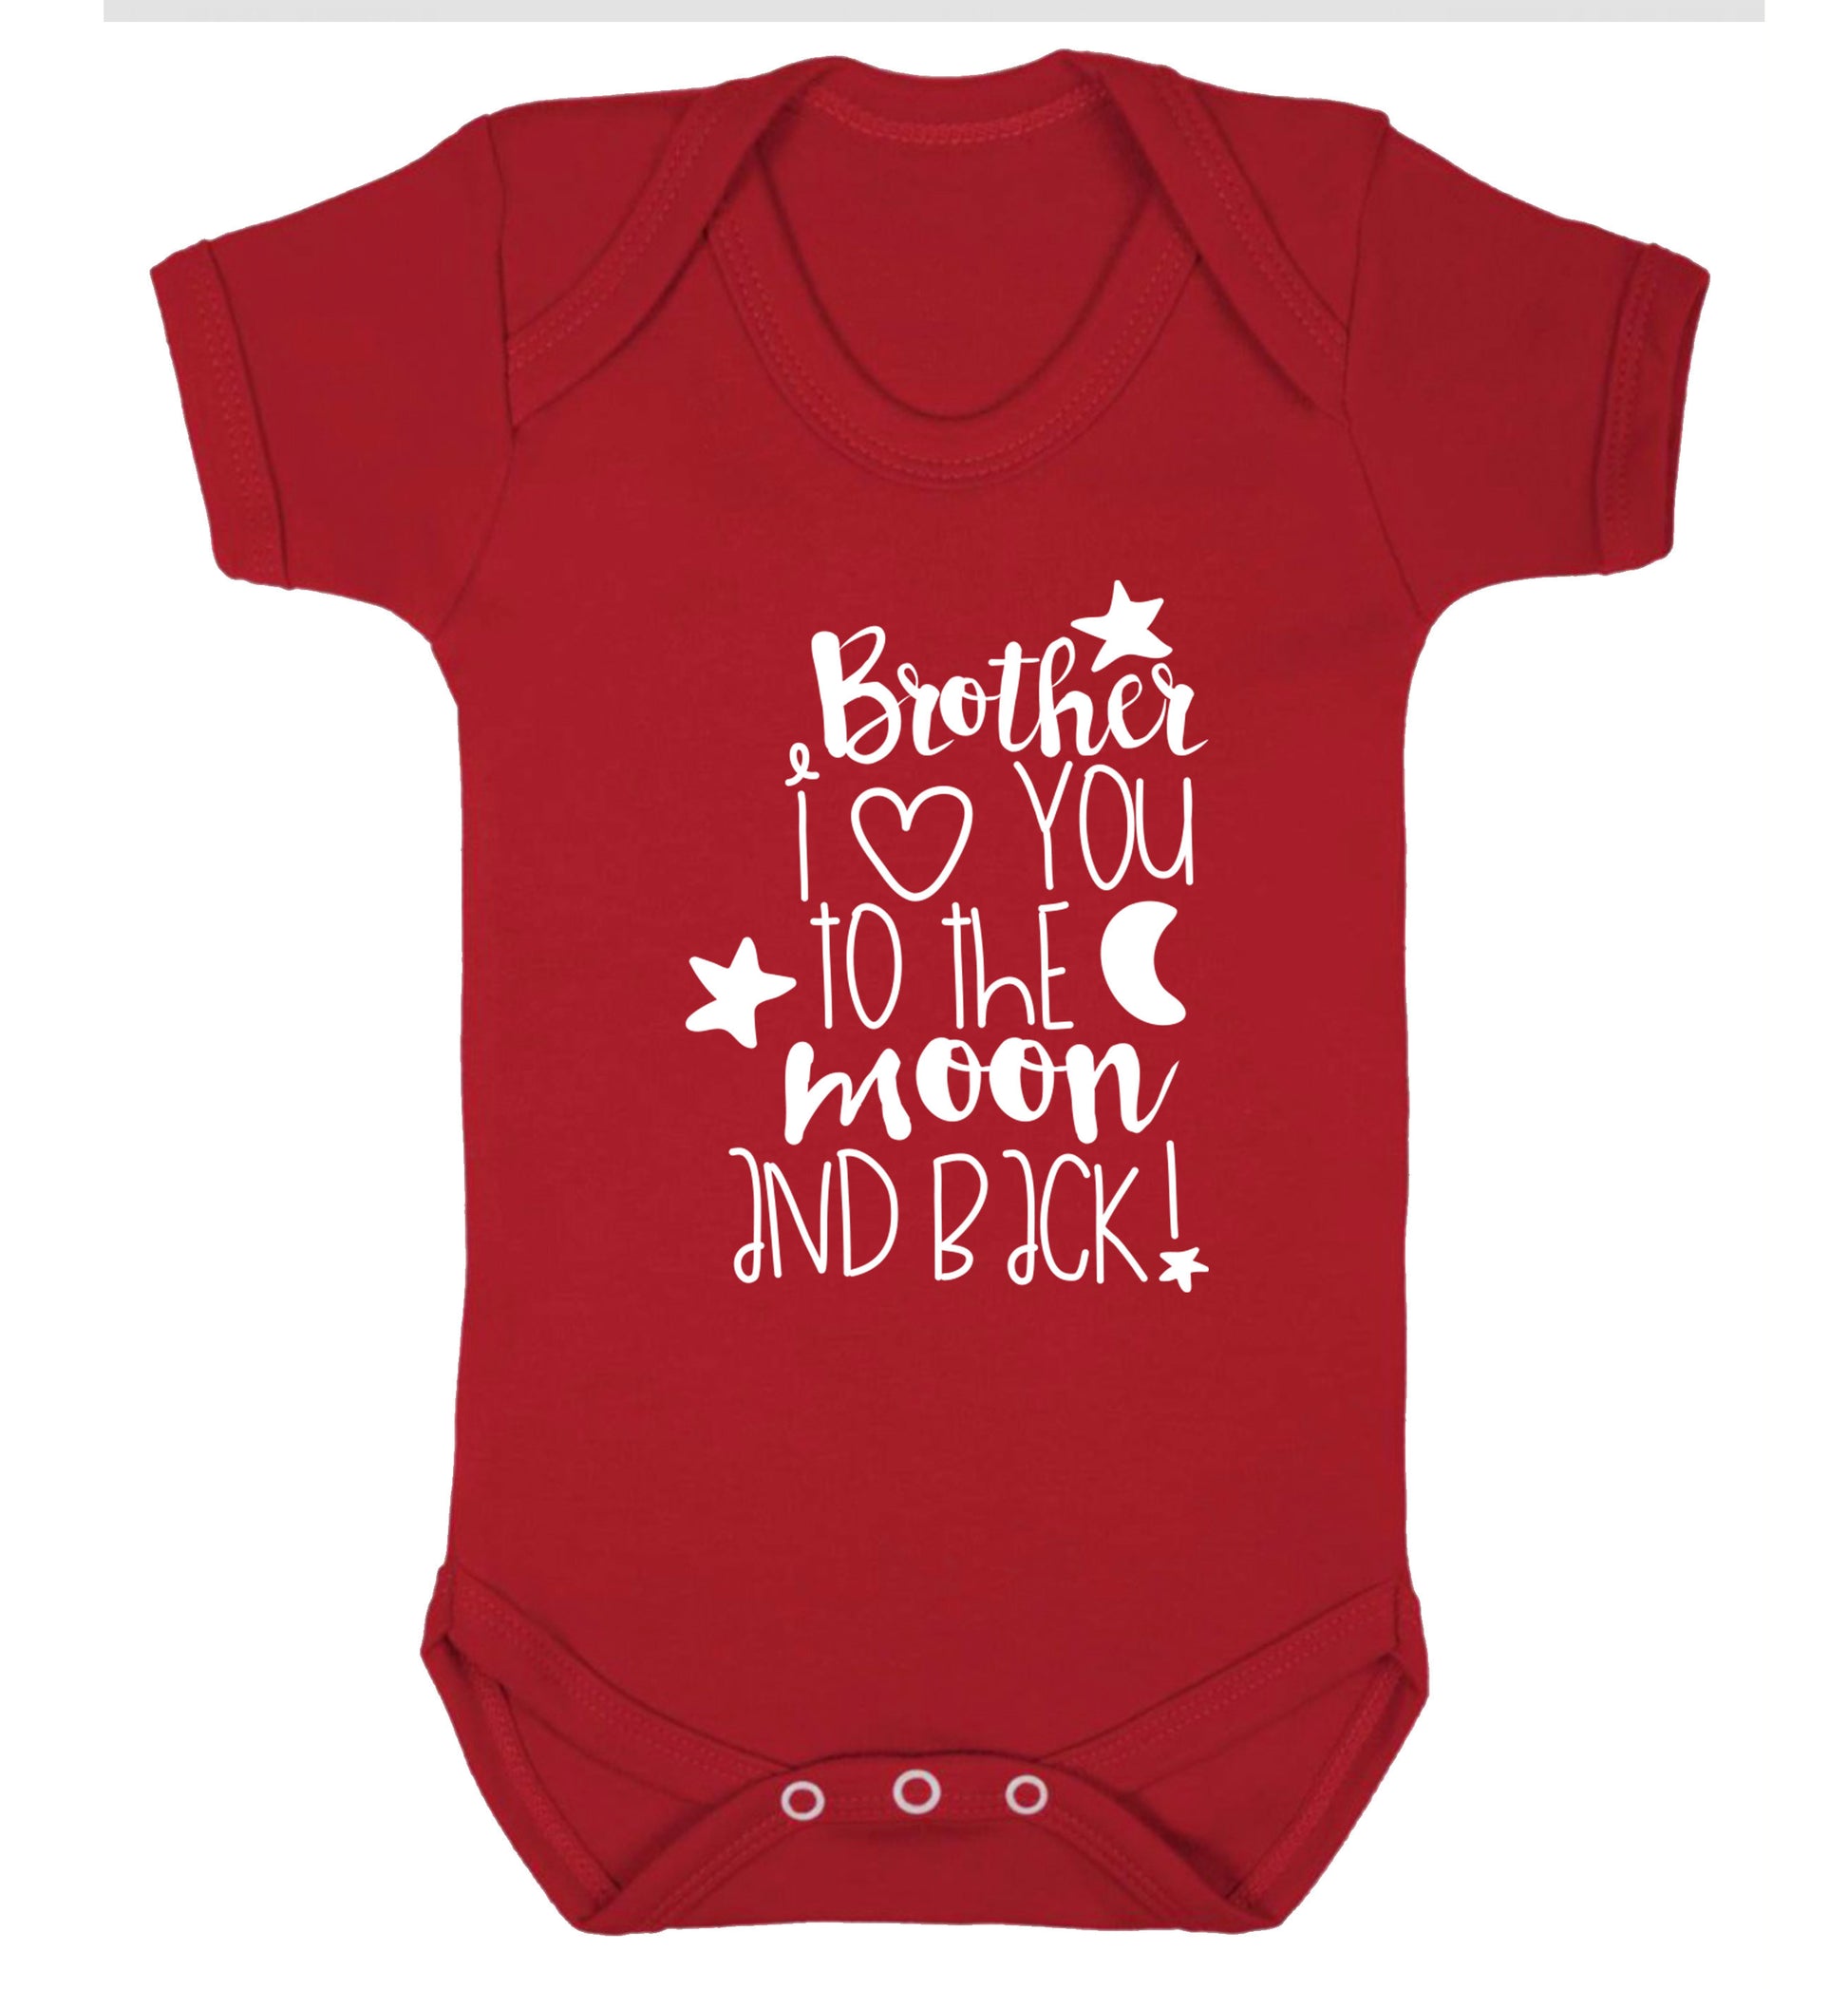 Brother I love you to the moon and back Baby Vest red 18-24 months